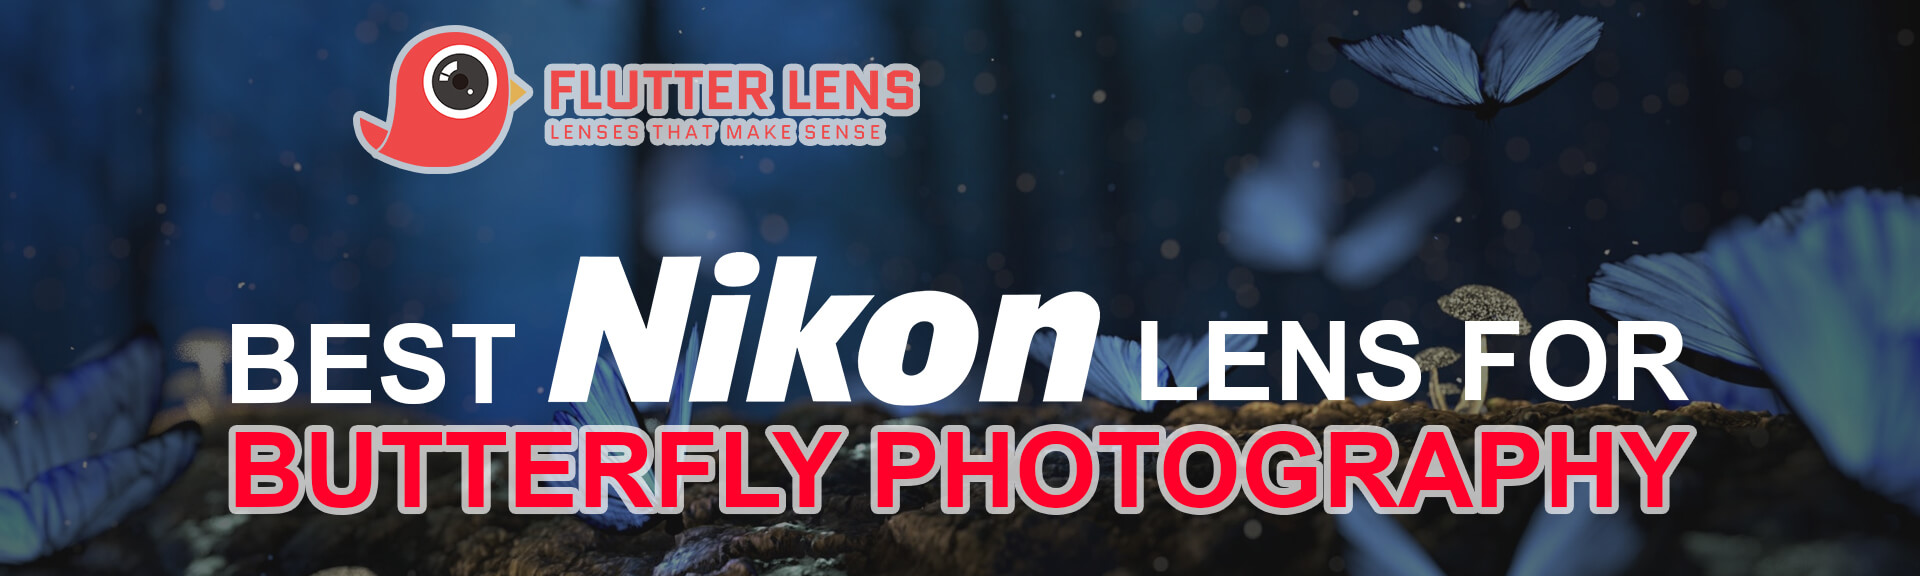 Top 5 Best Nikon Lenses for Butterfly Photography